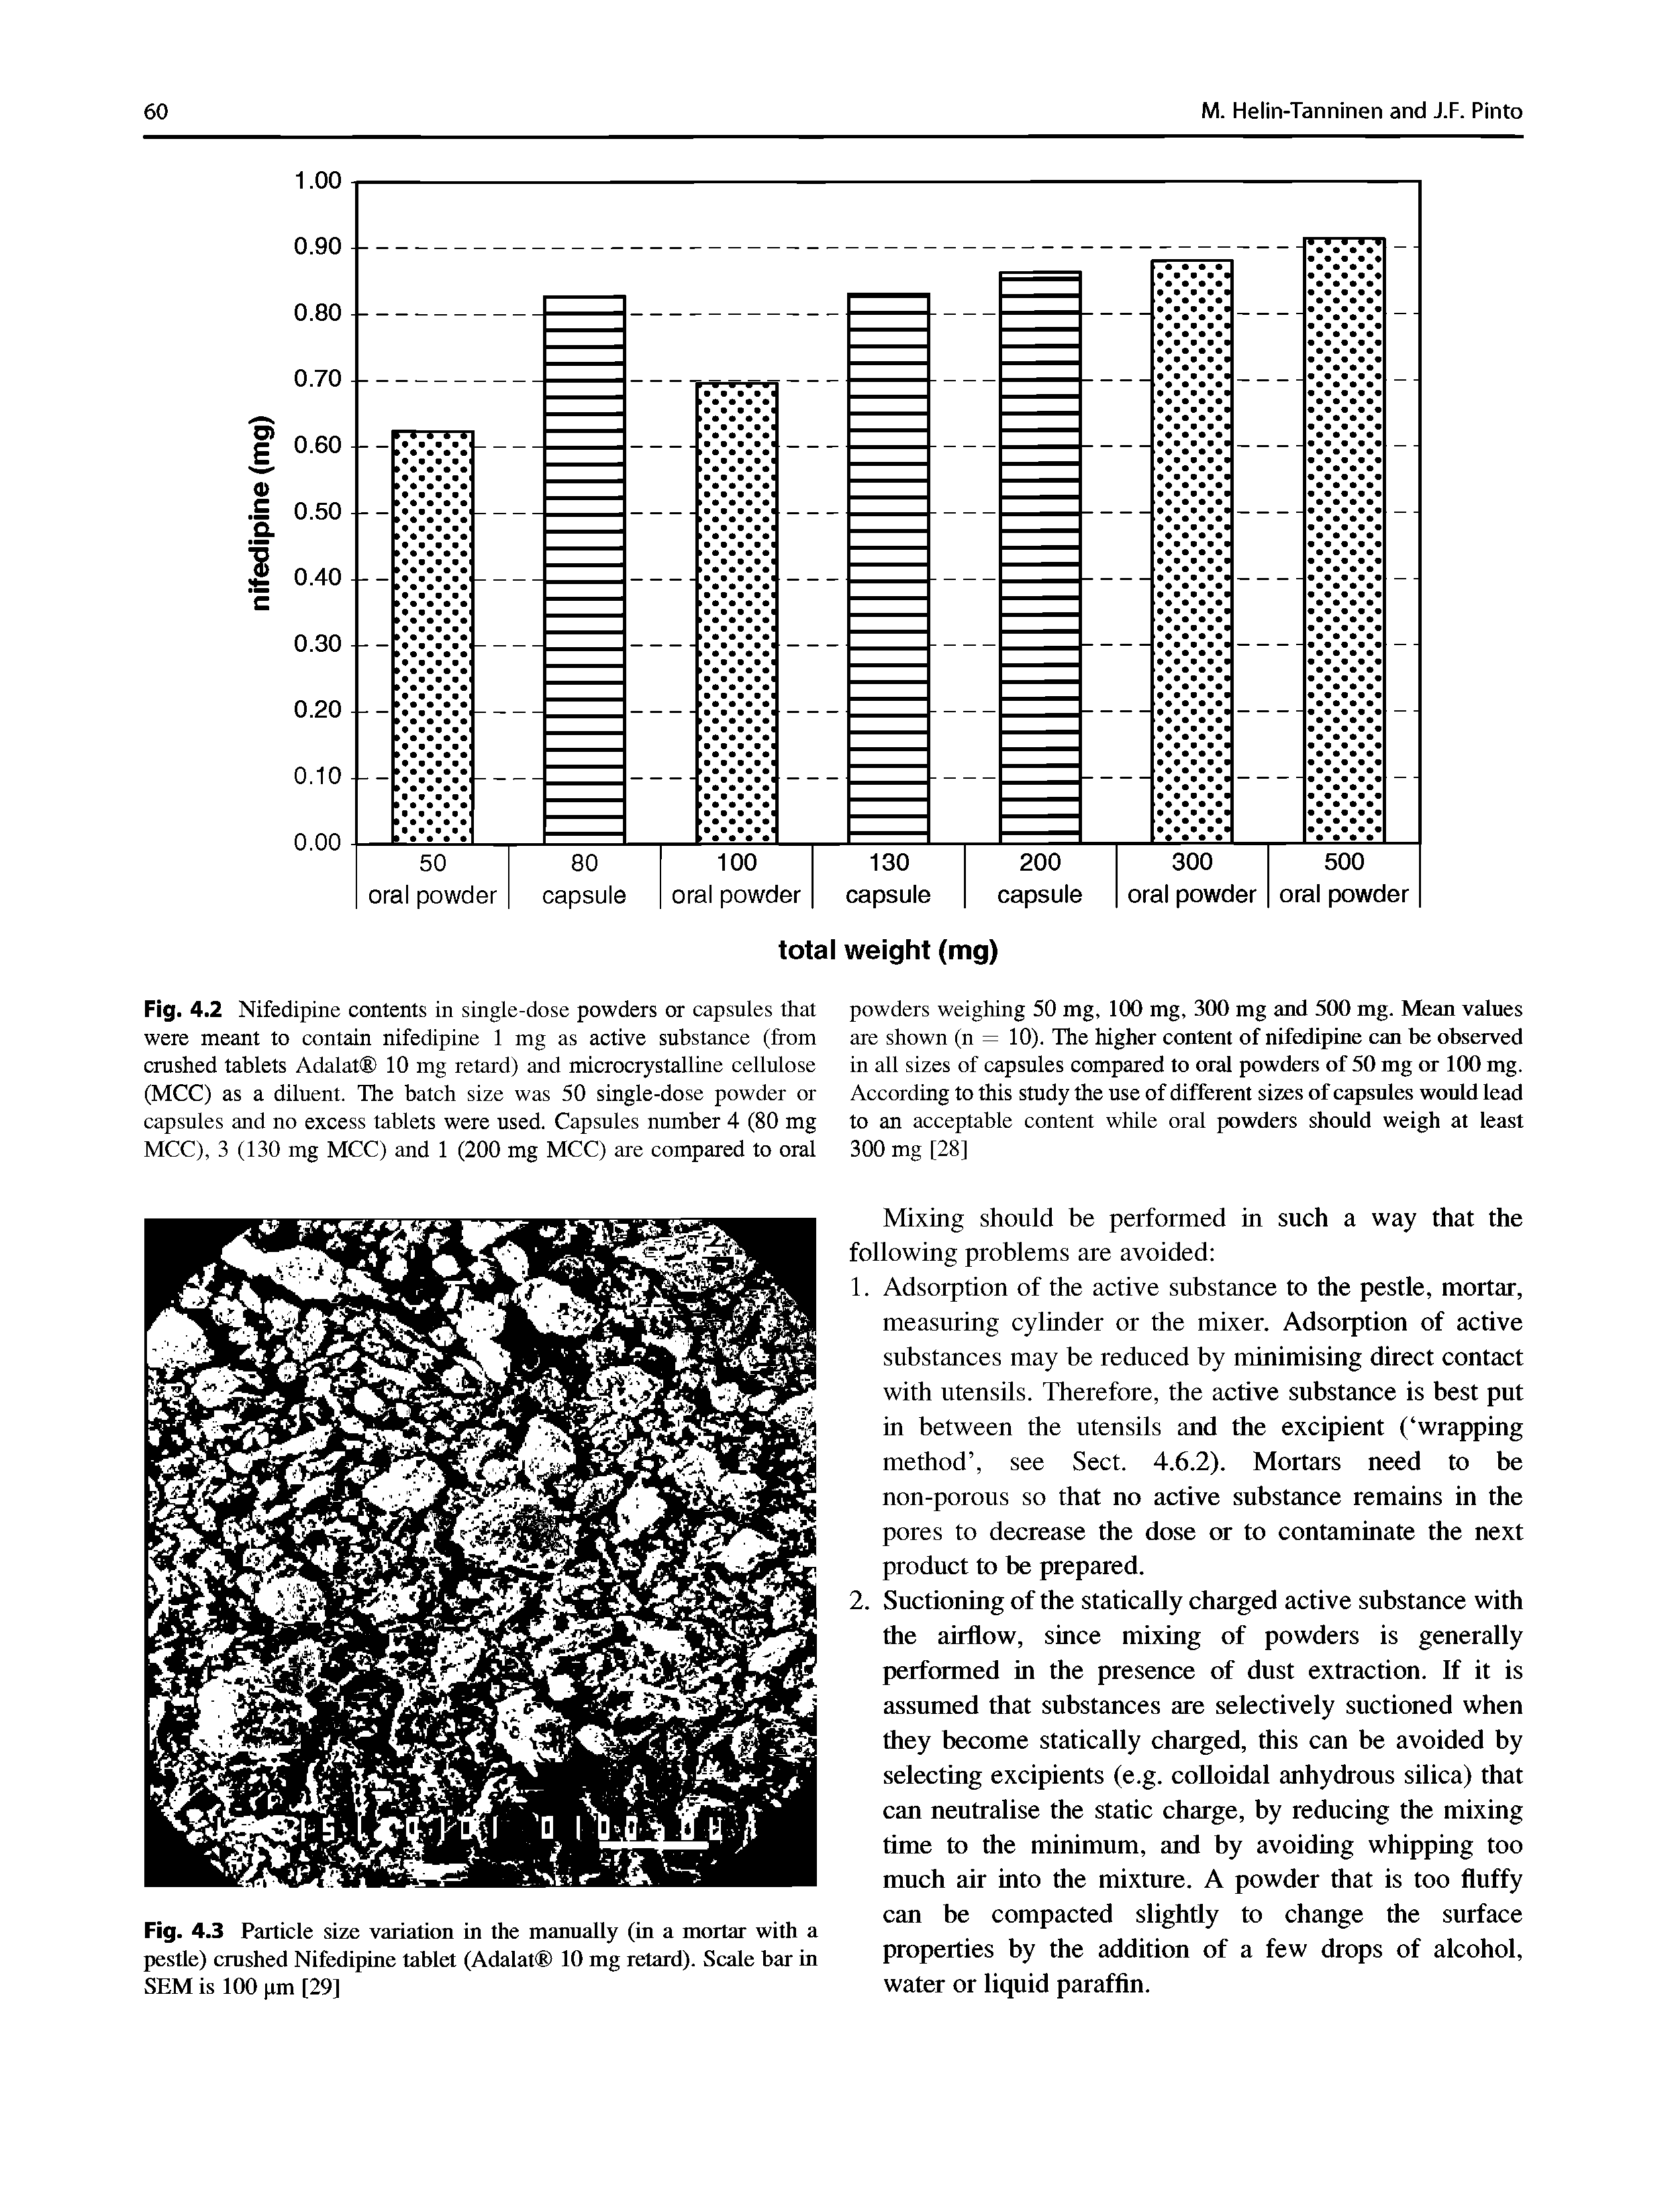 Fig. 4.2 Nifedipine contents in single-dose powders or capsules that were meant to contain nifedipine 1 mg as active substance (from crushed tablets Adalat 10 mg retard) and microcrystalline cellulose (MCC) as a diluent. The batch size was 50 single-dose powder or capsules and no excess tablets were used. Capsules number 4 (80 mg MCC), 3 (130 mg MCC) and 1 (200 mg MCC) are compared to oral...